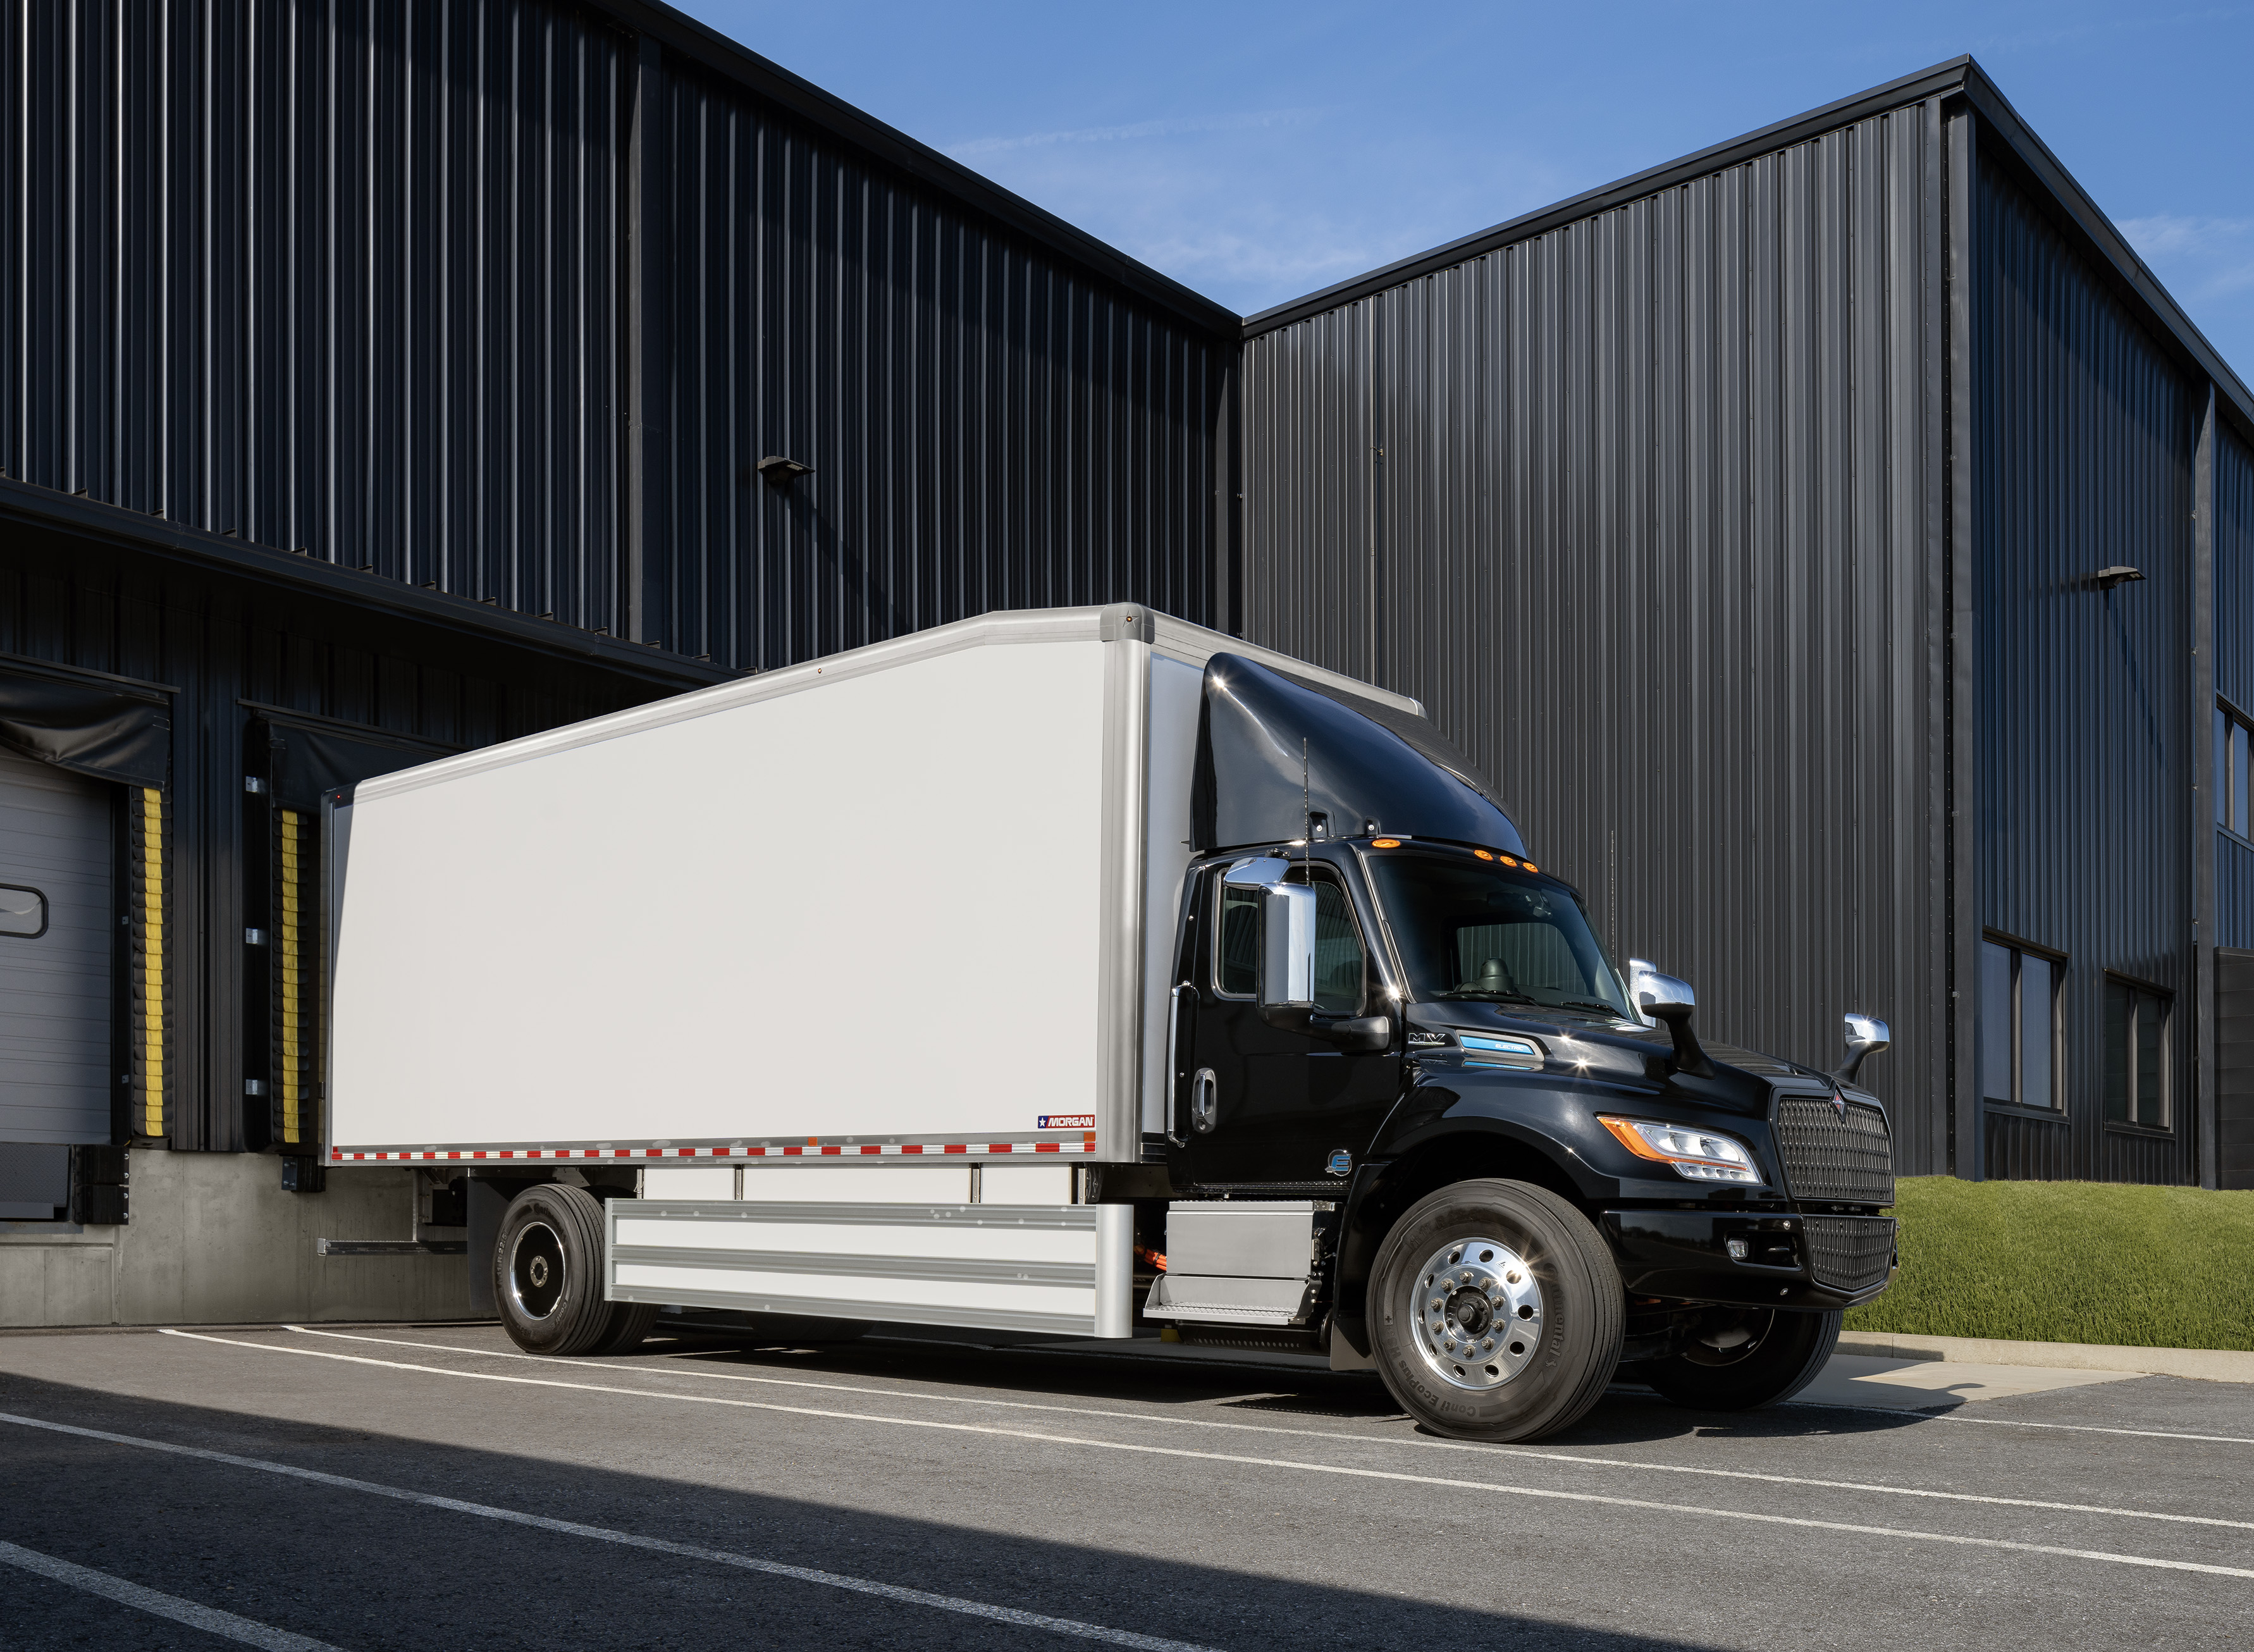 Morgan Truck Body Unveils “NEO” Proof-of-Concept Body Innovations During  NTEA Work Truck Week 2023